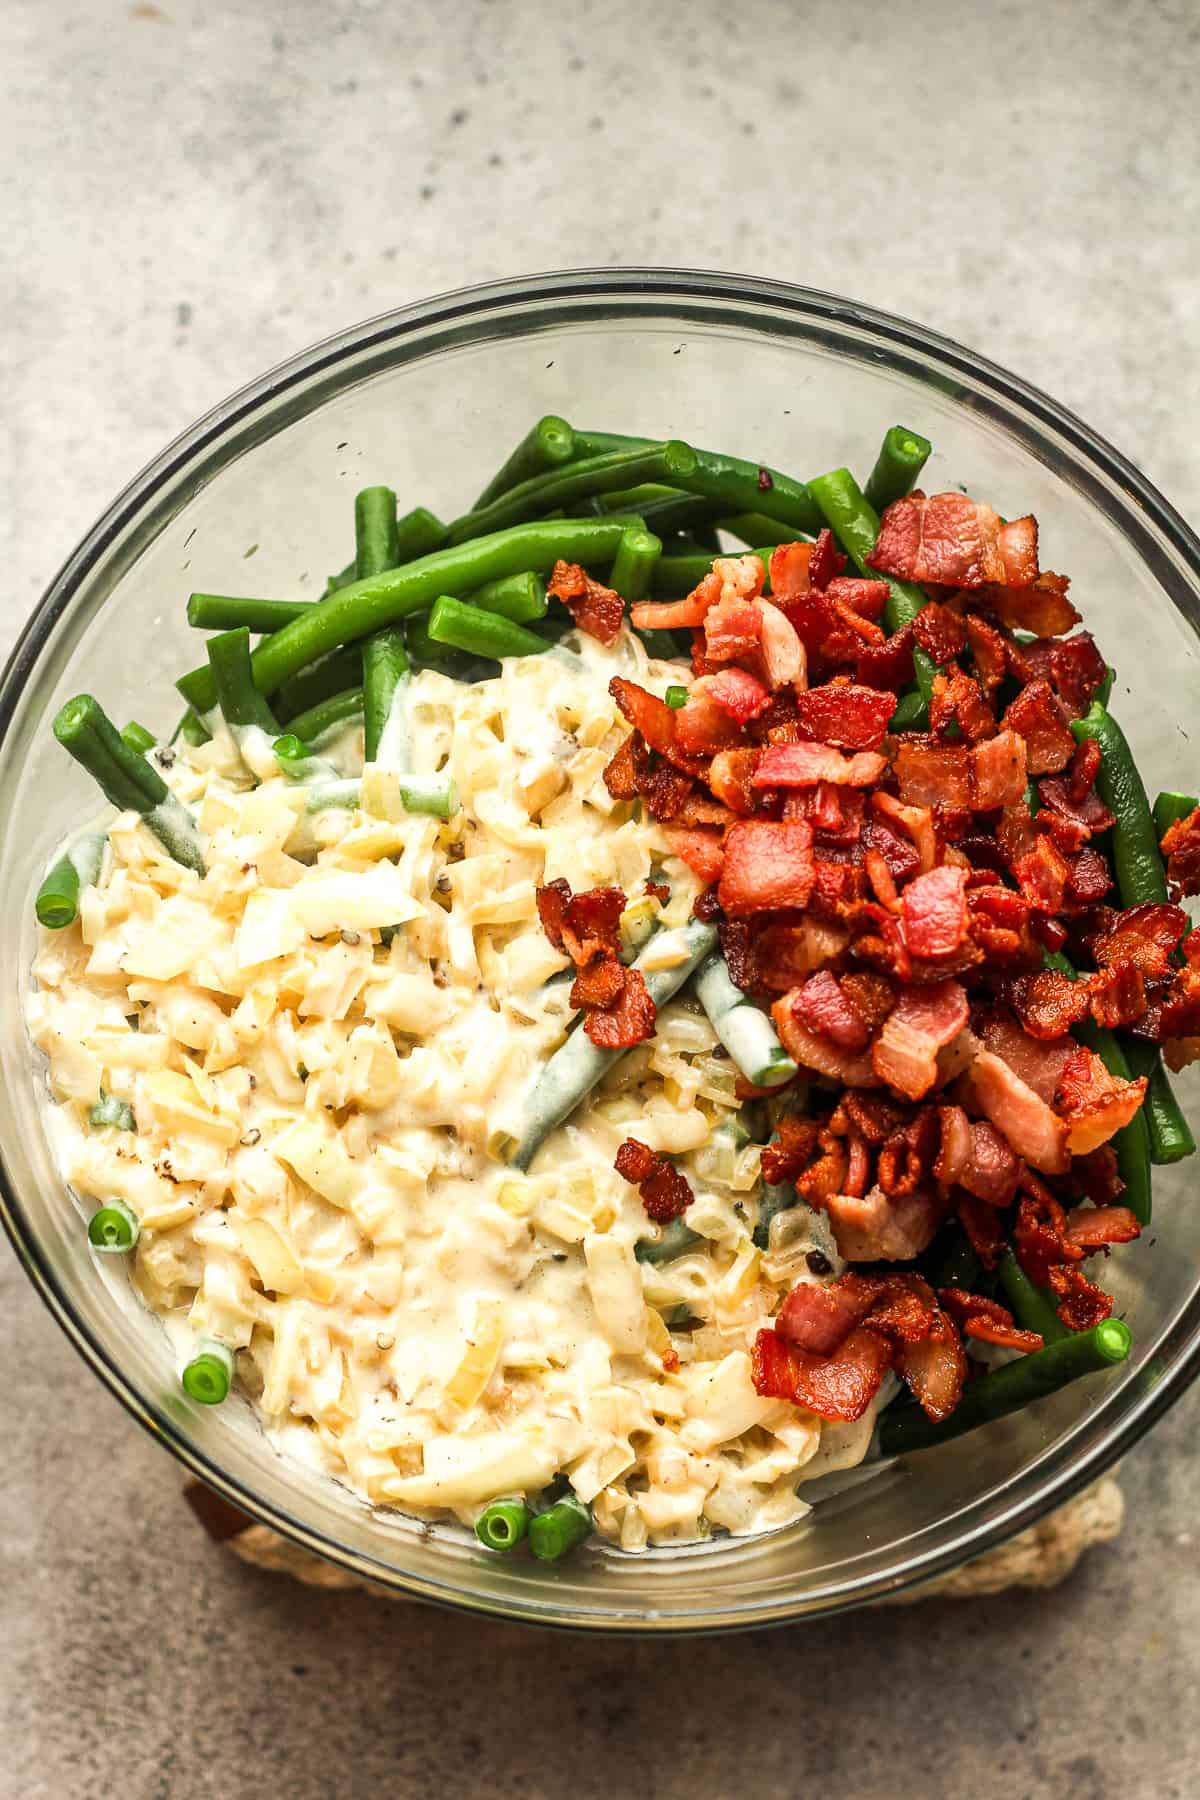 A bowl of the blanched green beans with the creamy roux and crispy bacon on top.